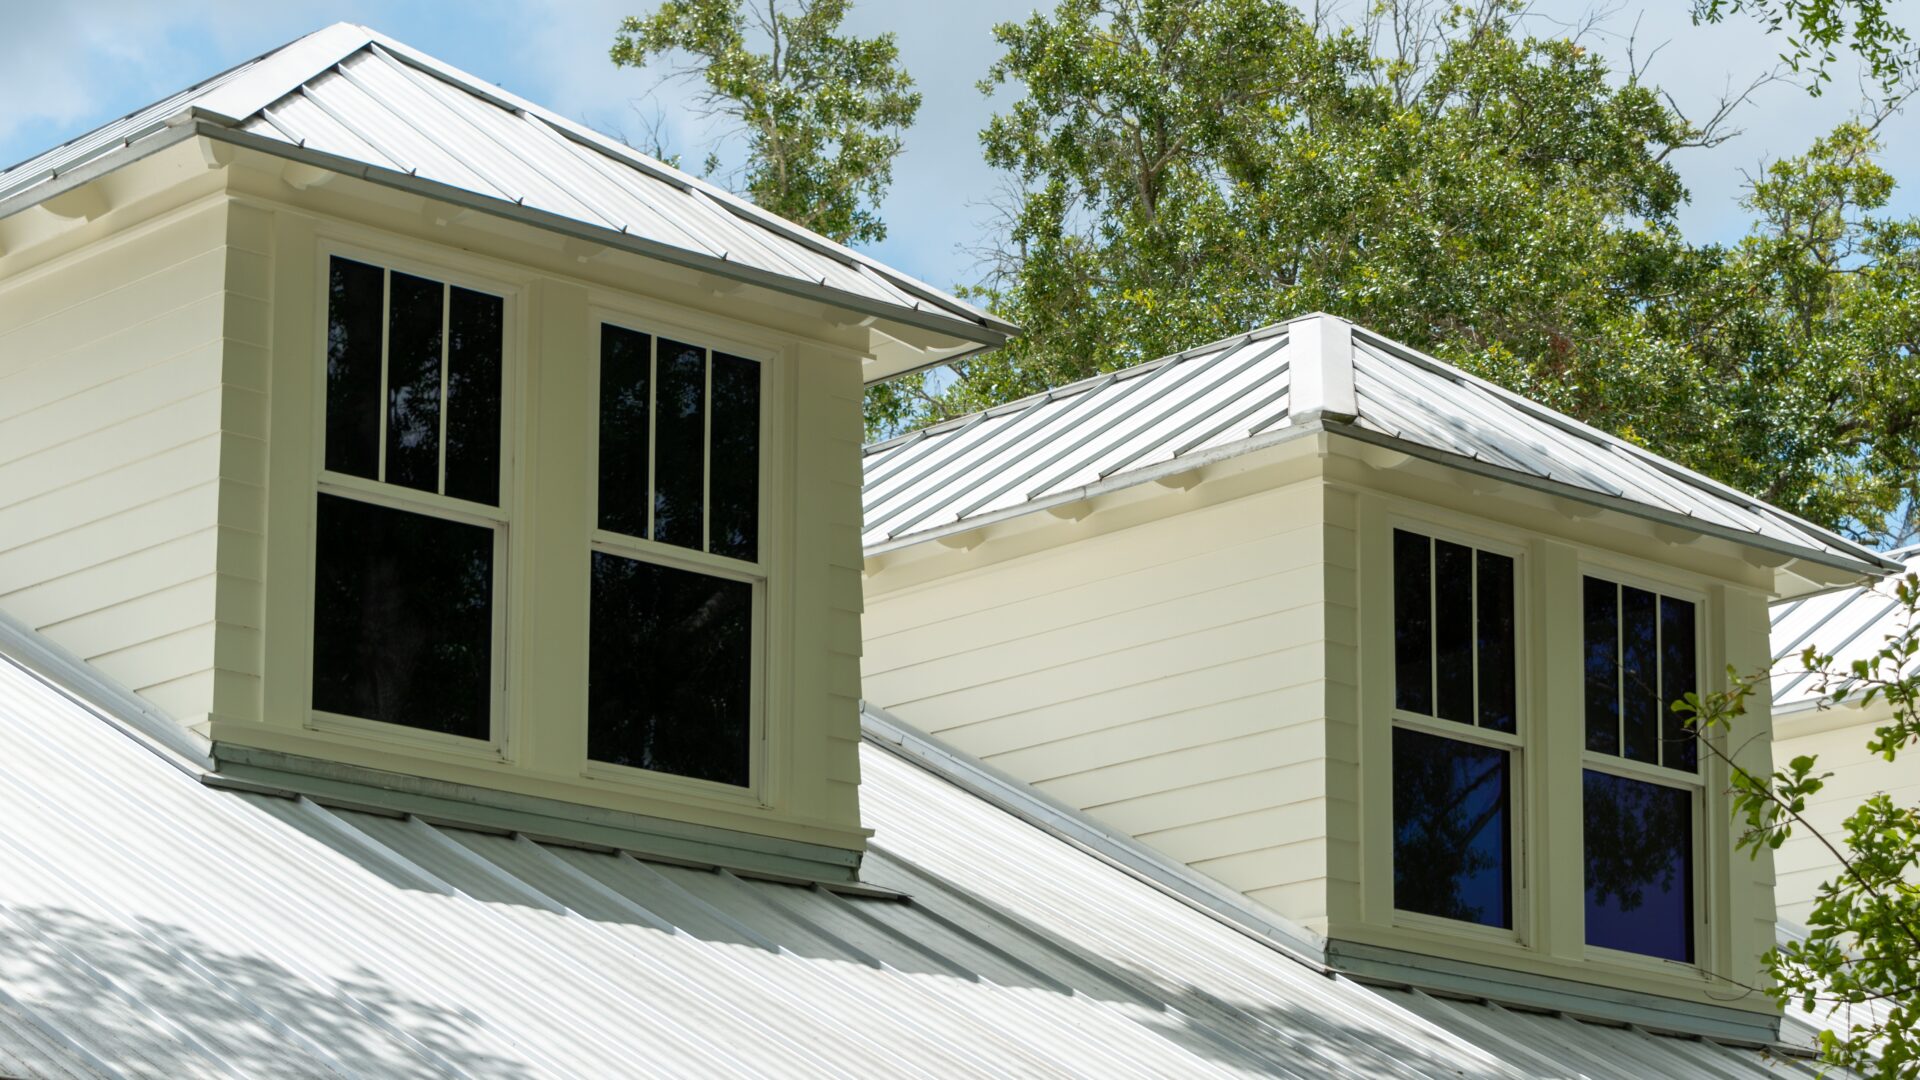 Two dormers with gray metal roofing